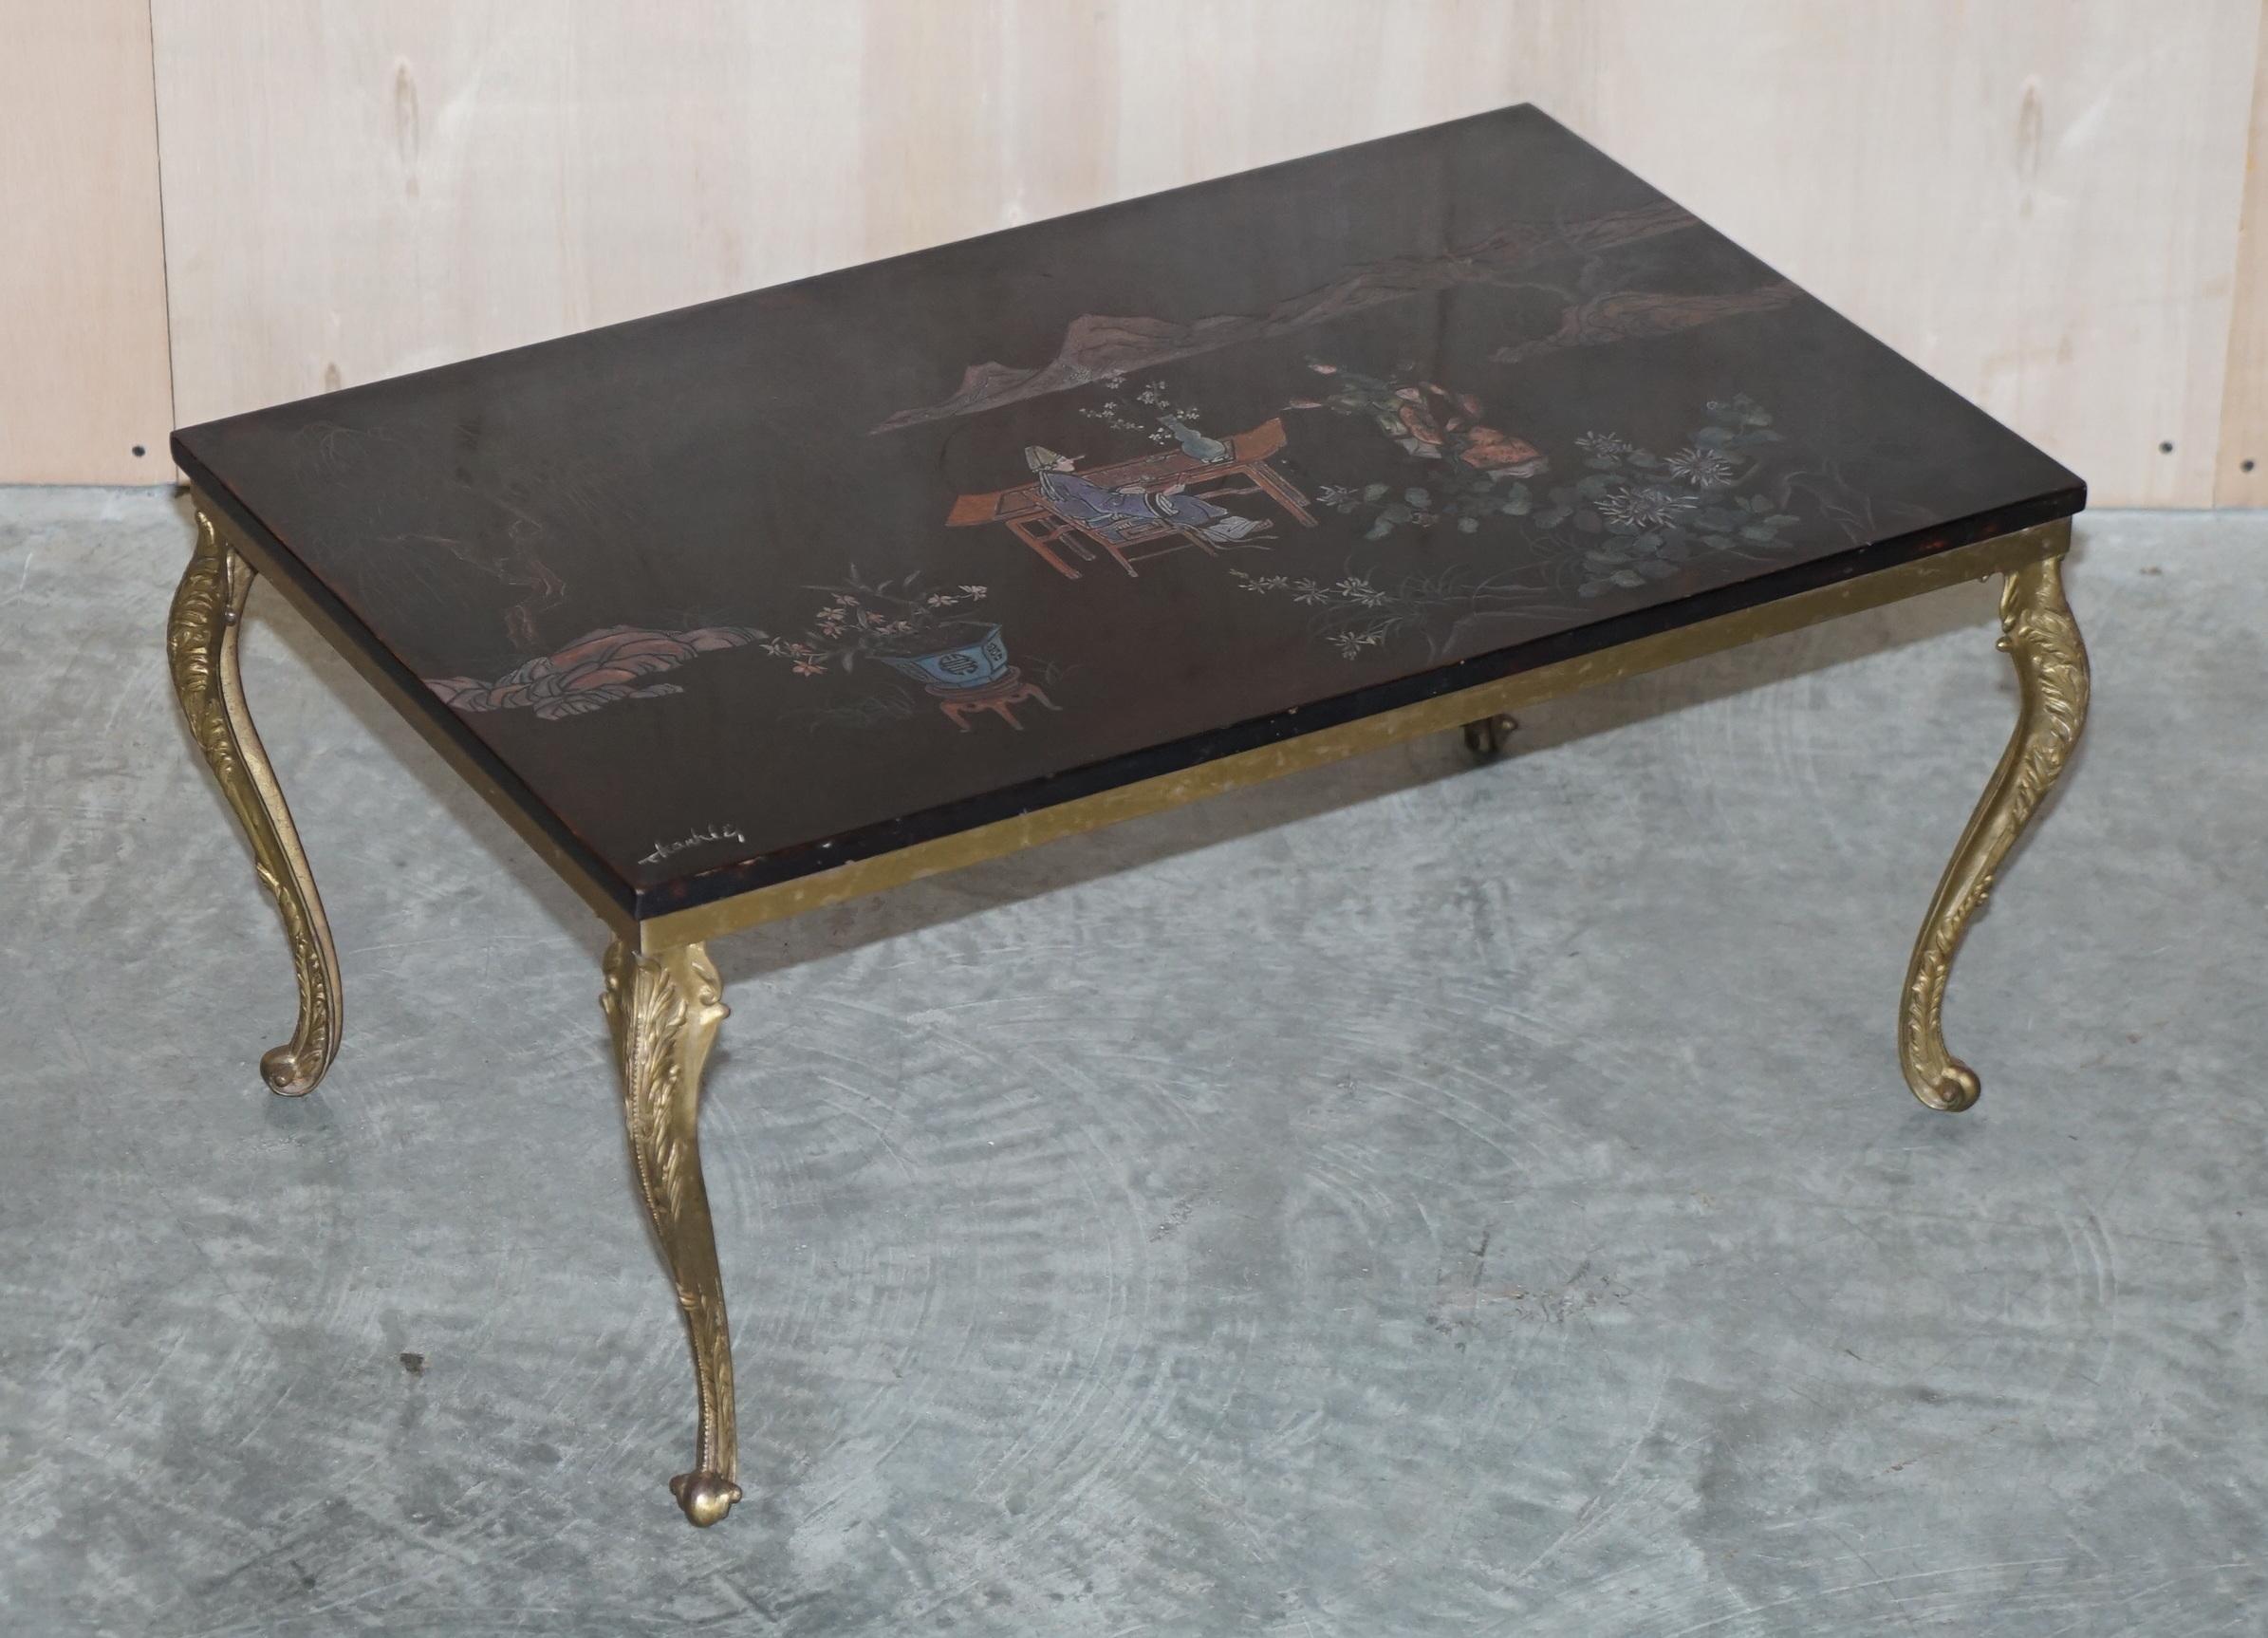 We are delighted to offer this lovely vintage hand painted and signed Chinese coffee table

A very good looking and well made piece, the top is in some kind of hardwood, its signed to the bottom left corner by the artist. The base frame is brass